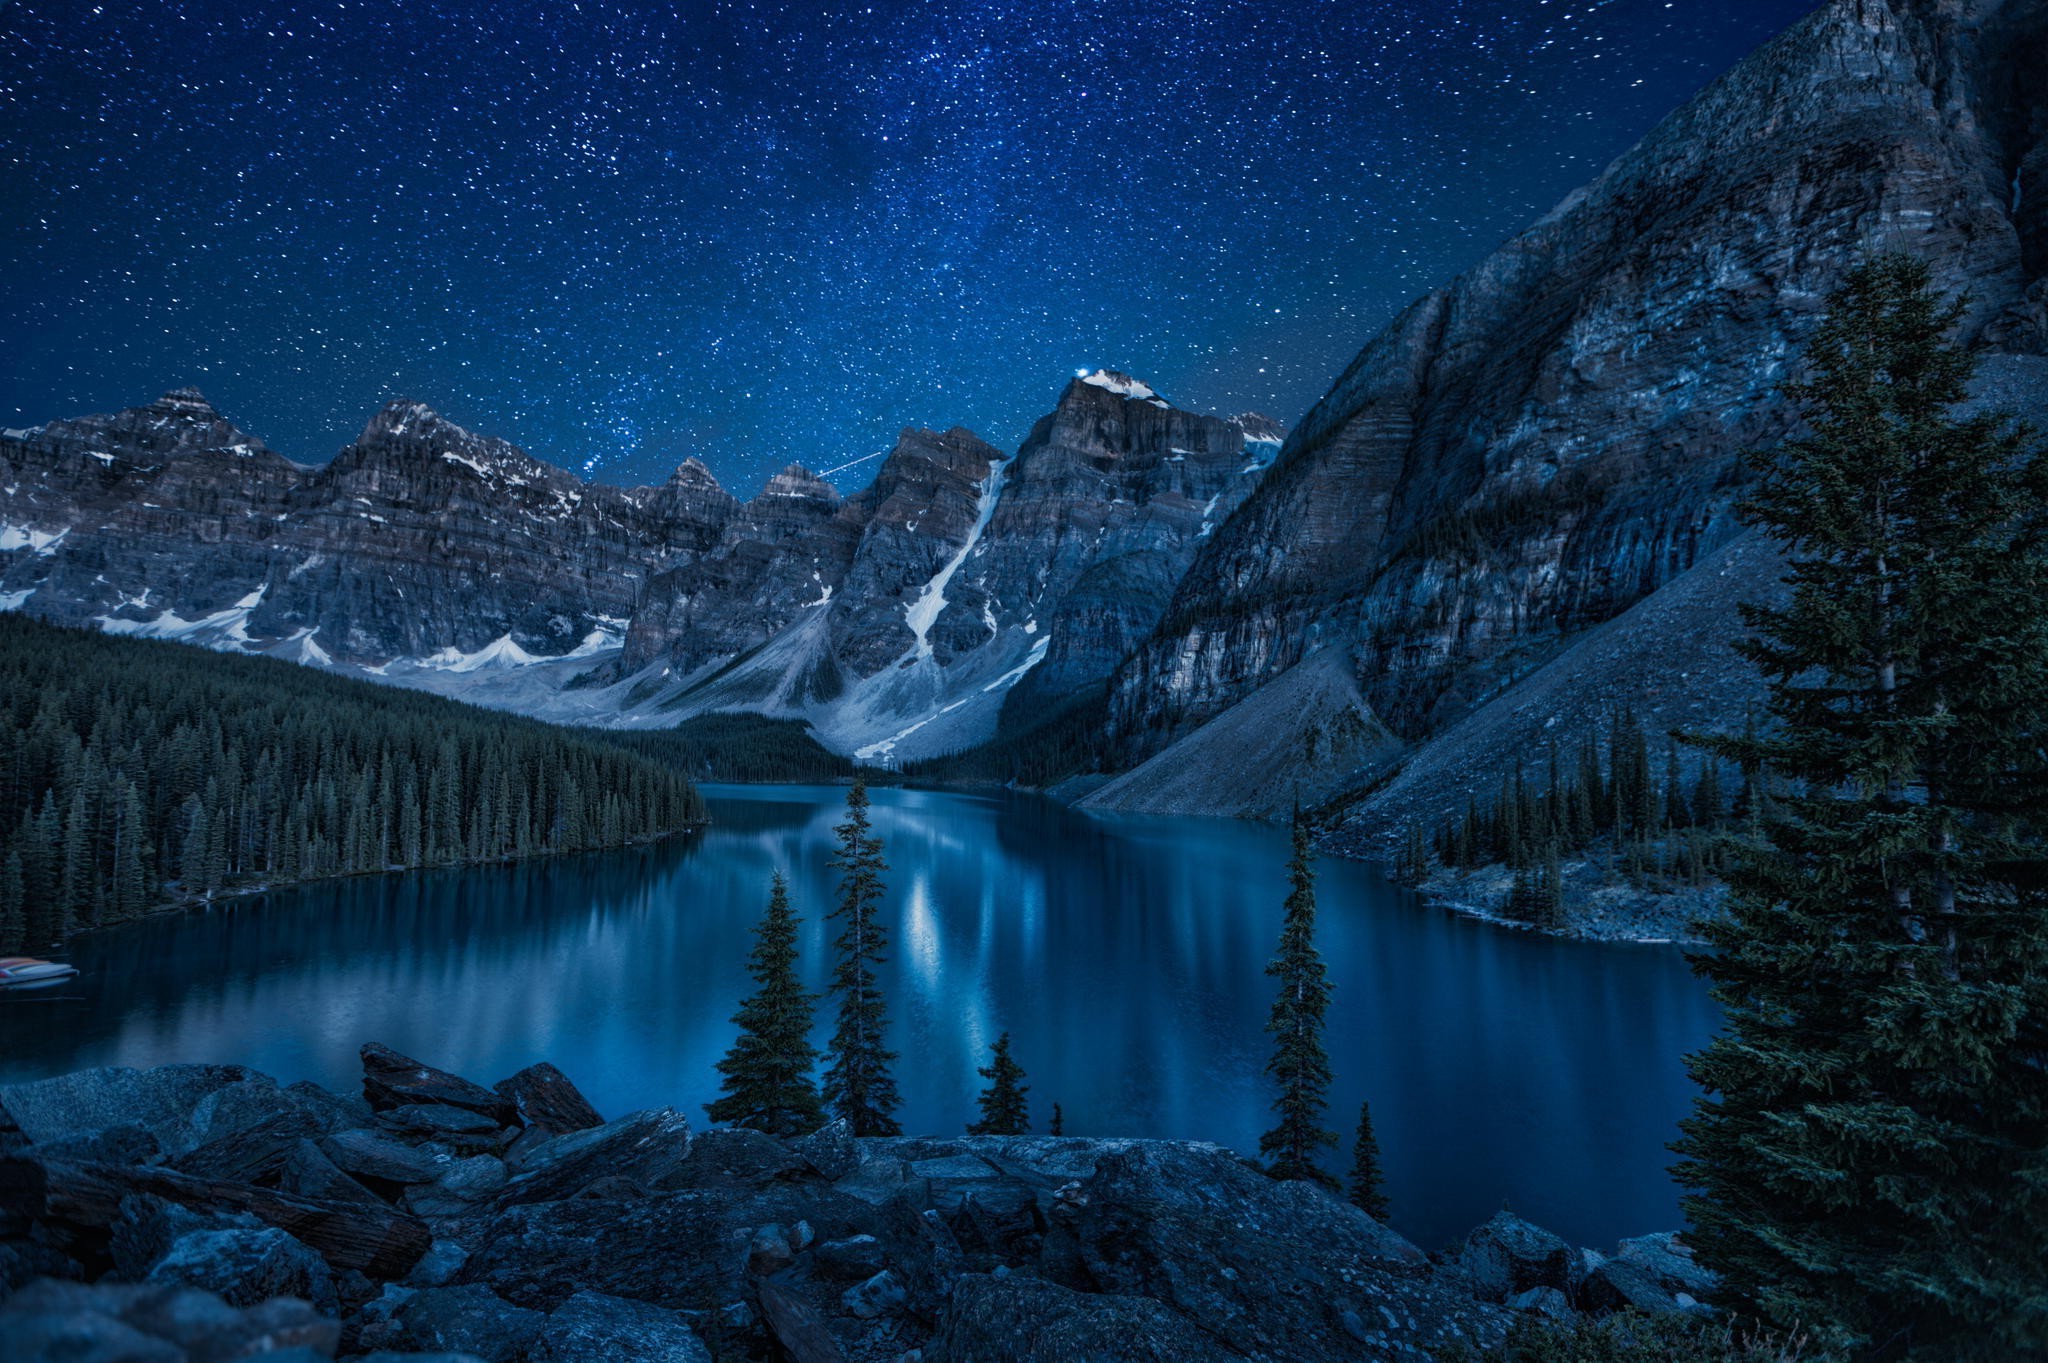 Moraine Lake South Channel Wallpapers